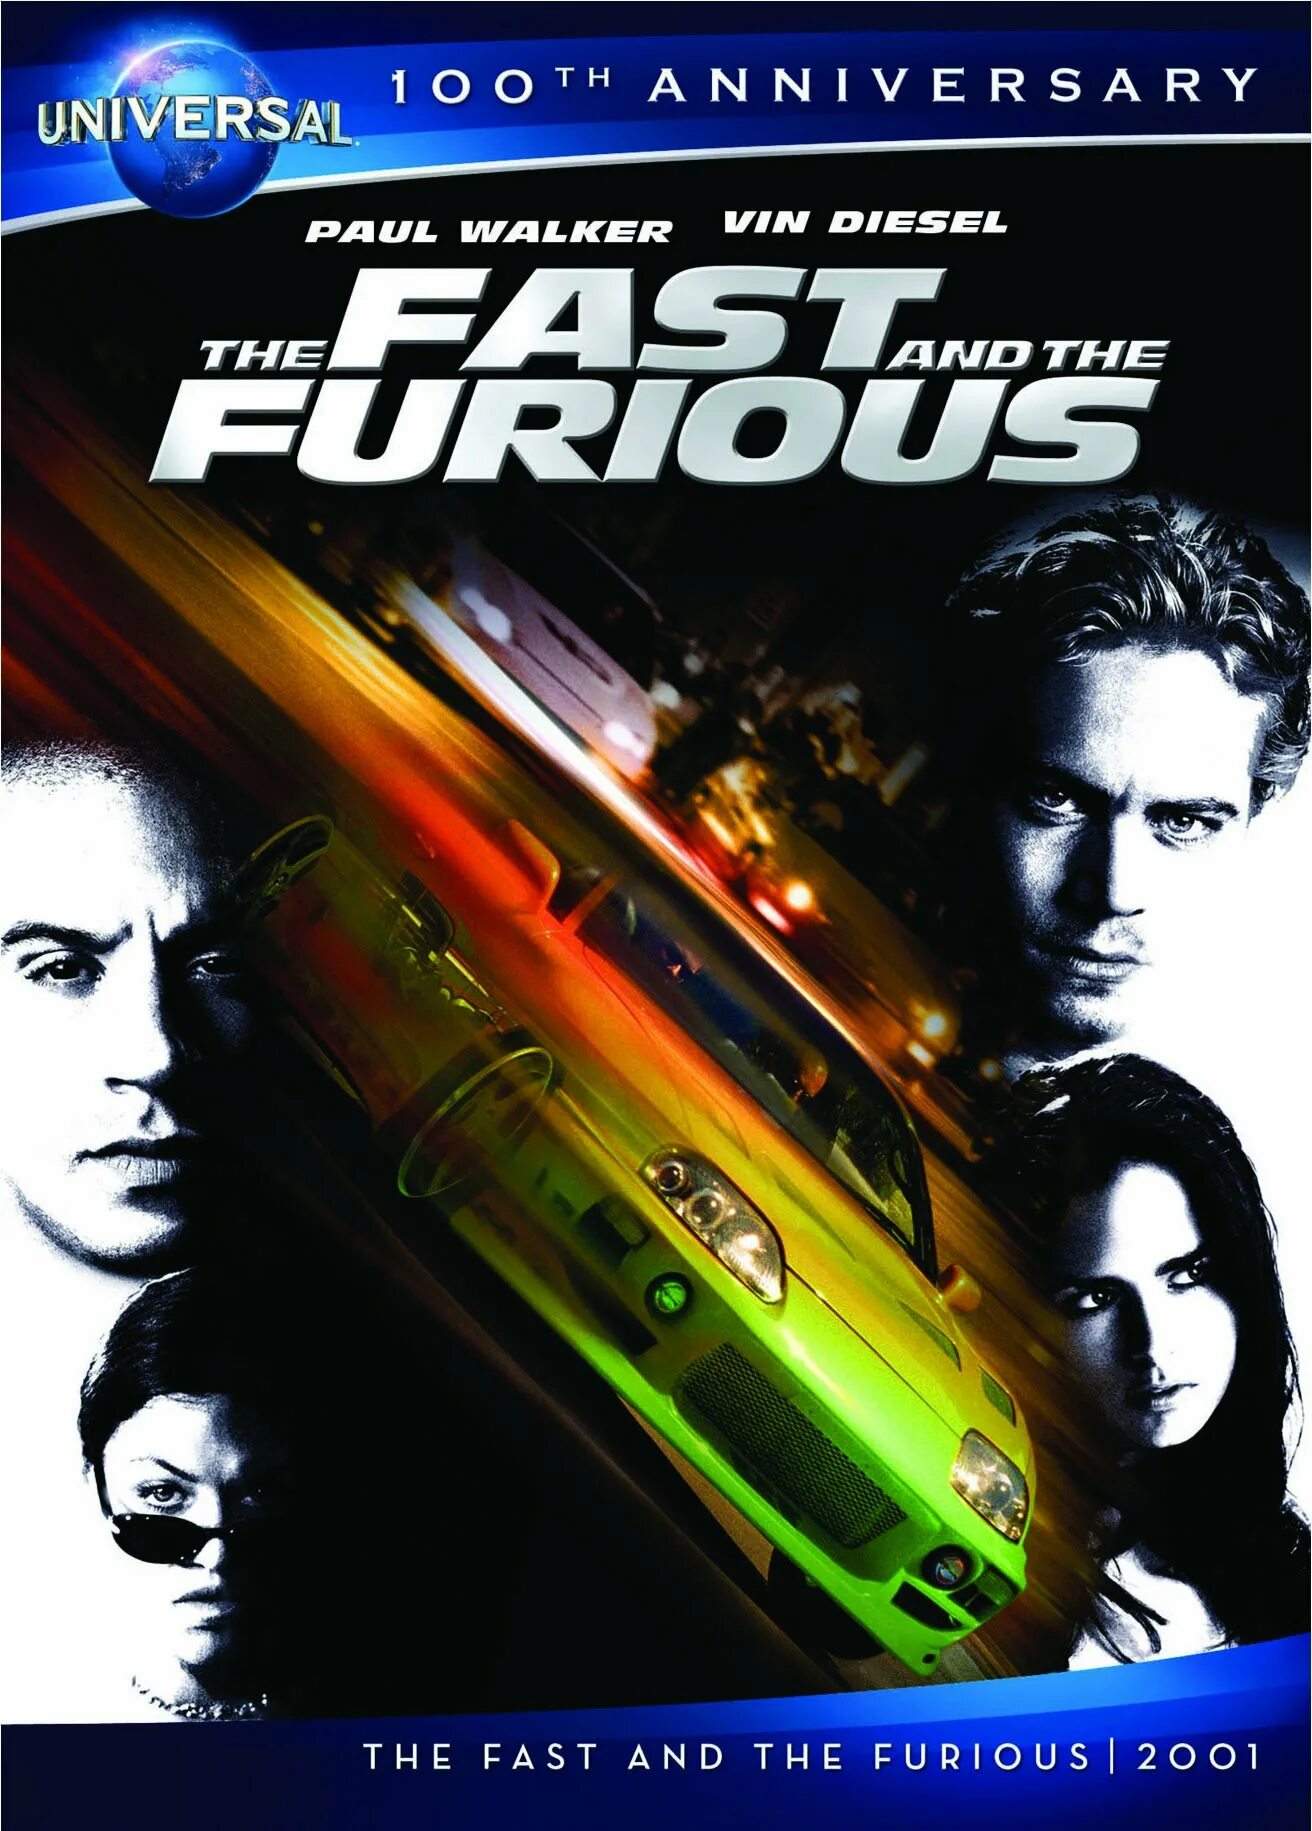 Fast and Furious 1. Форсаж 2001 Постер. Fast an Furious 1 обложка. Soundtrack fast